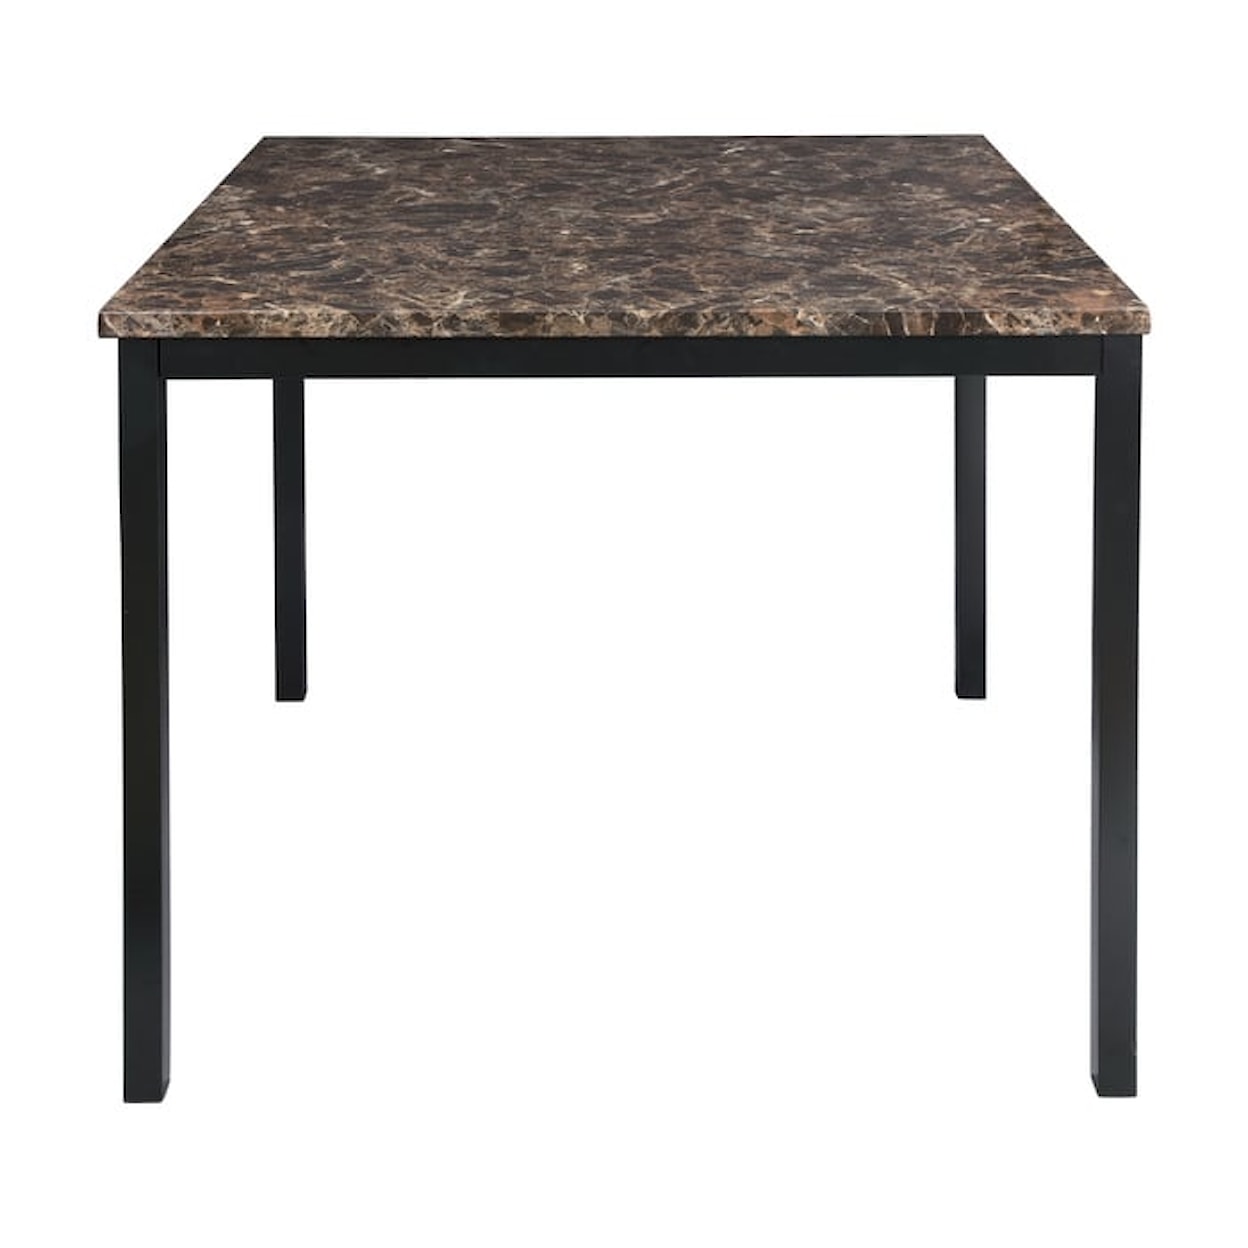 Homelegance Furniture Tempe Counter Height Table with Faux Marble Top